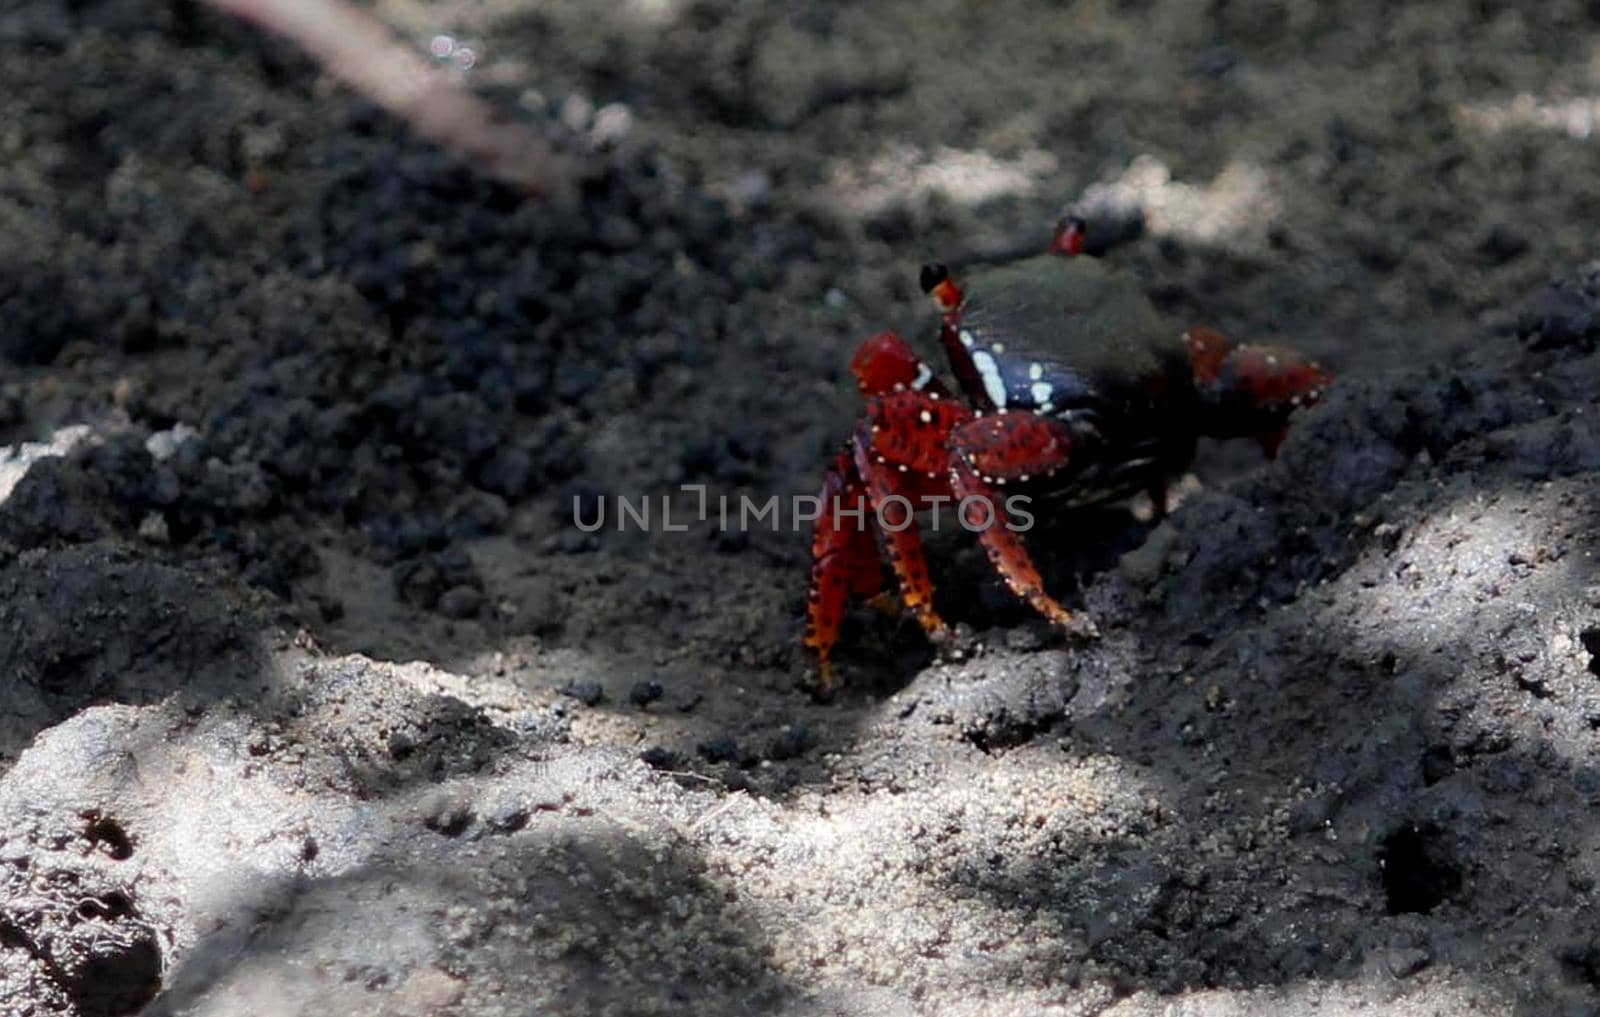 conde, bahia / brazil - december 25, 2013: crab is in mangrove in the city of Conde.